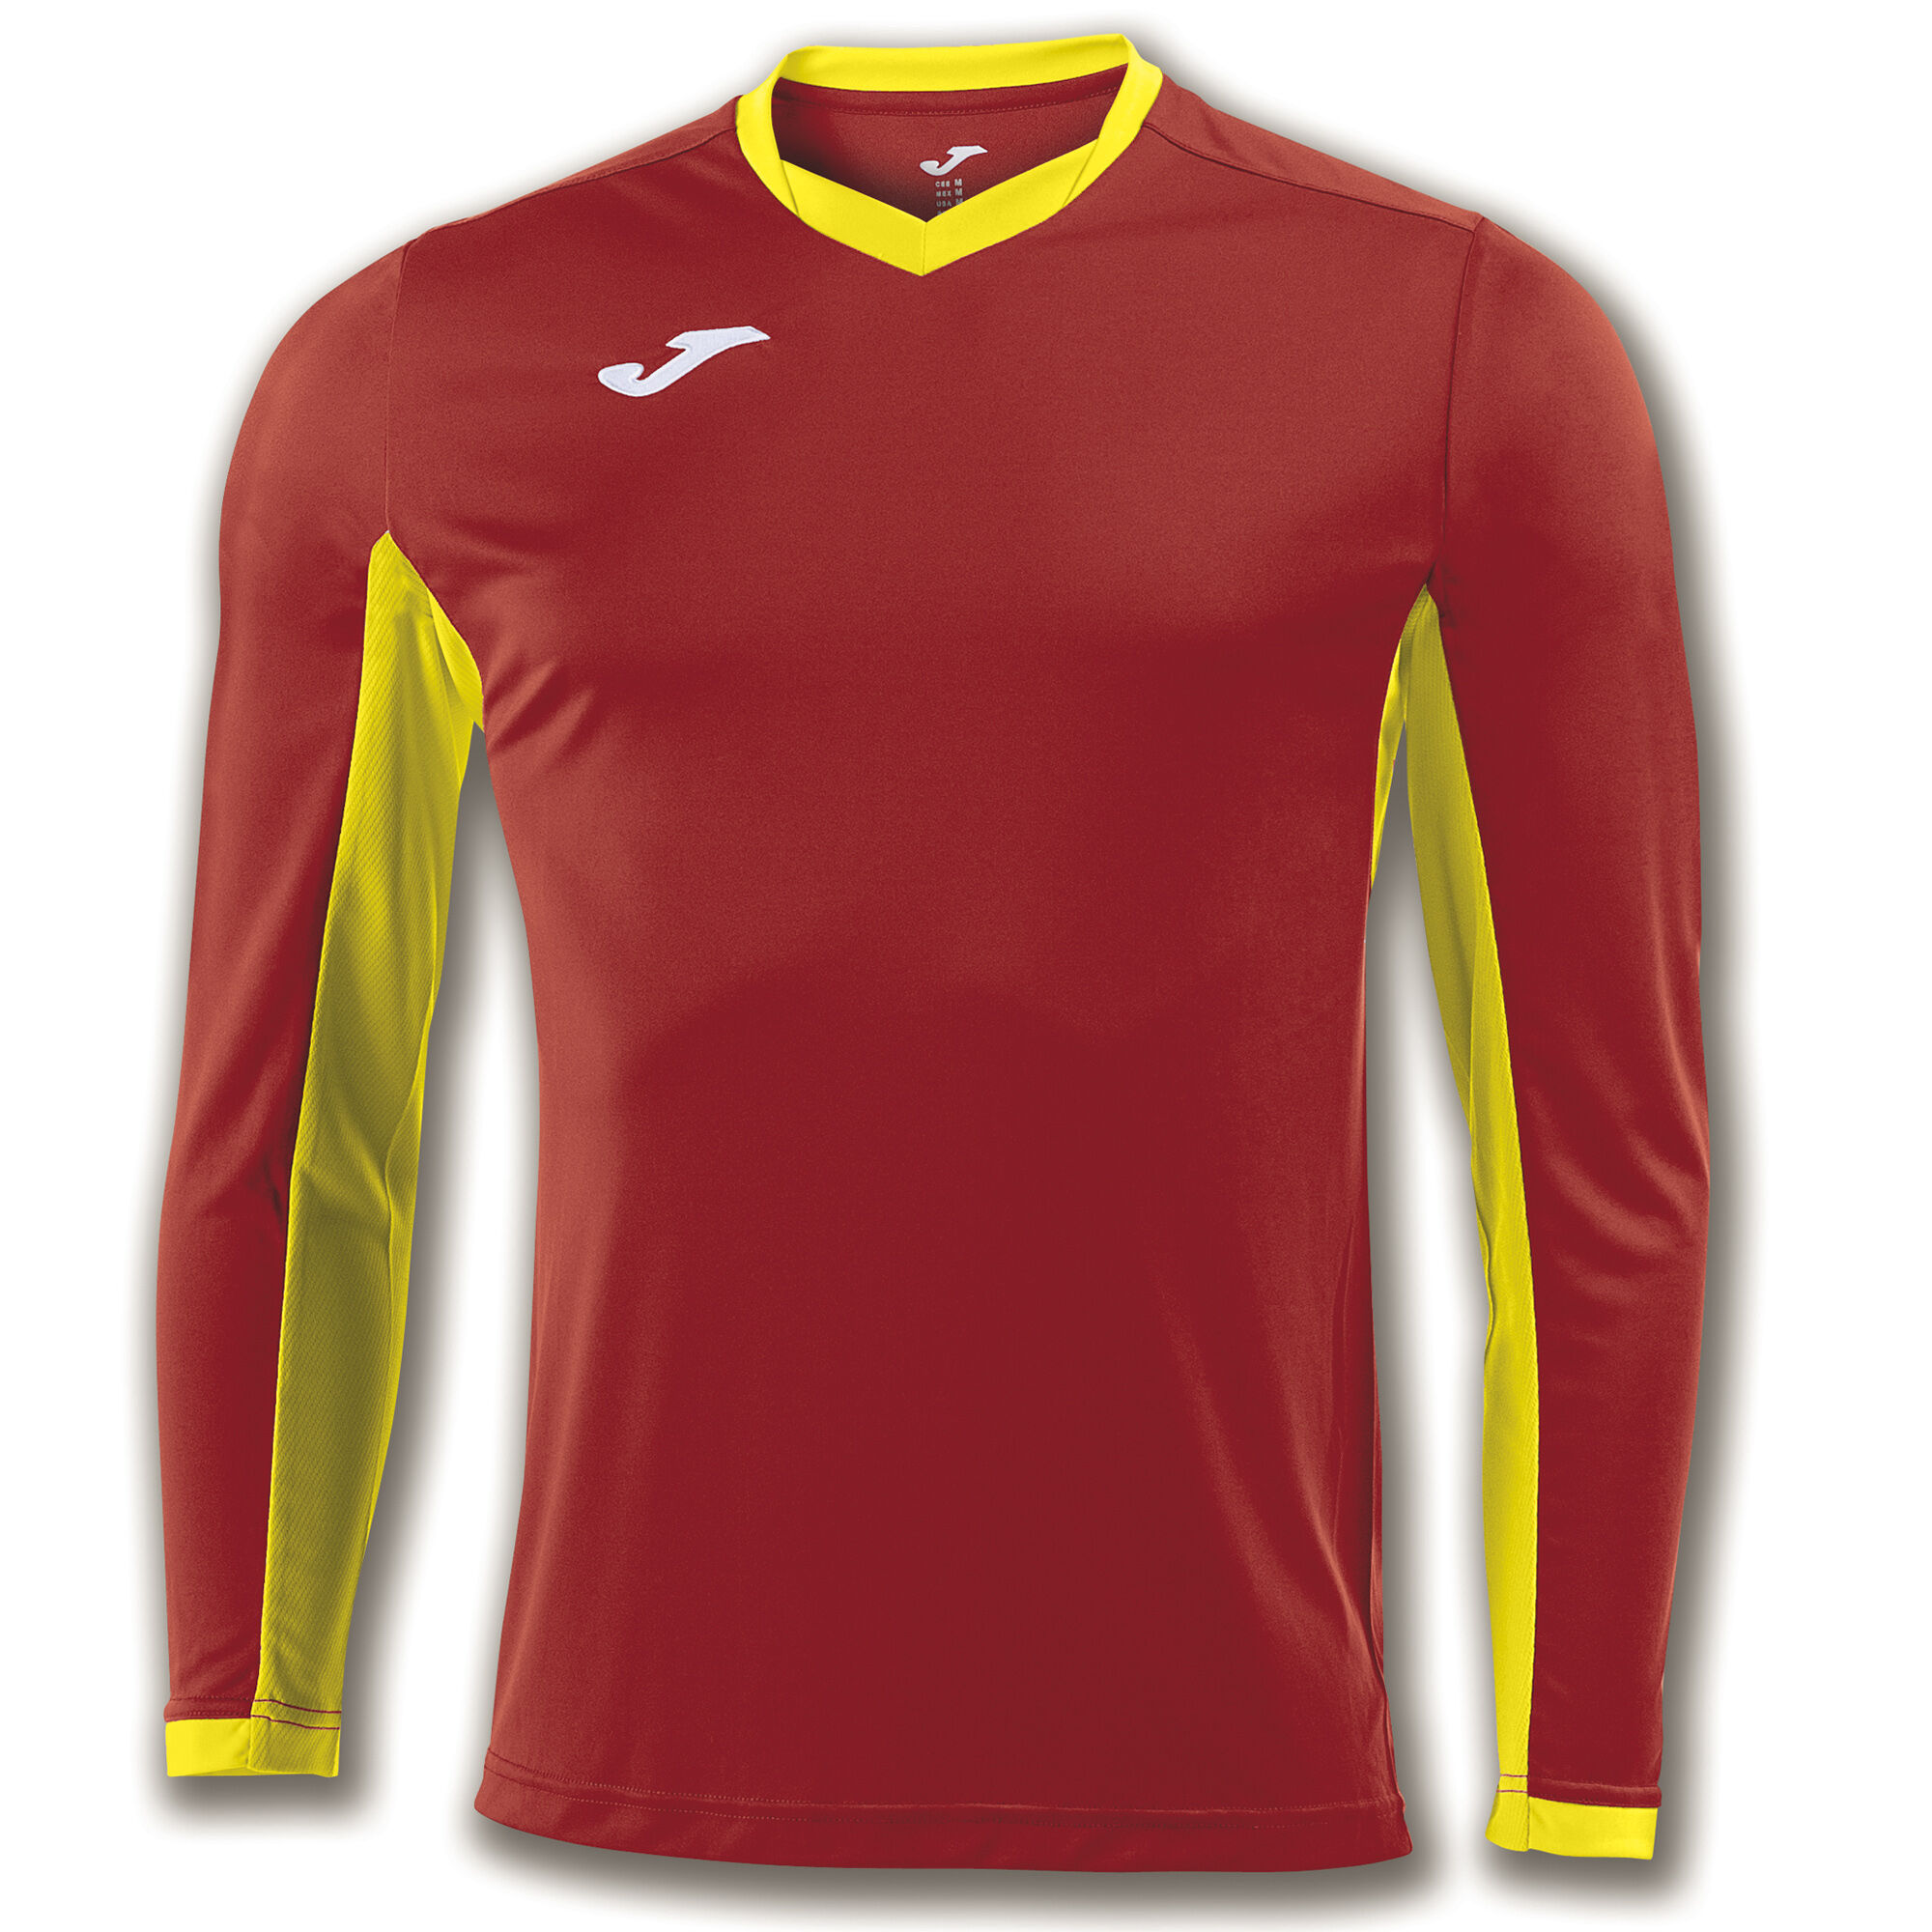 MAILLOT MANCHES LONGUES HOMME CHAMPIONSHIP IV ROUGE JAUNE